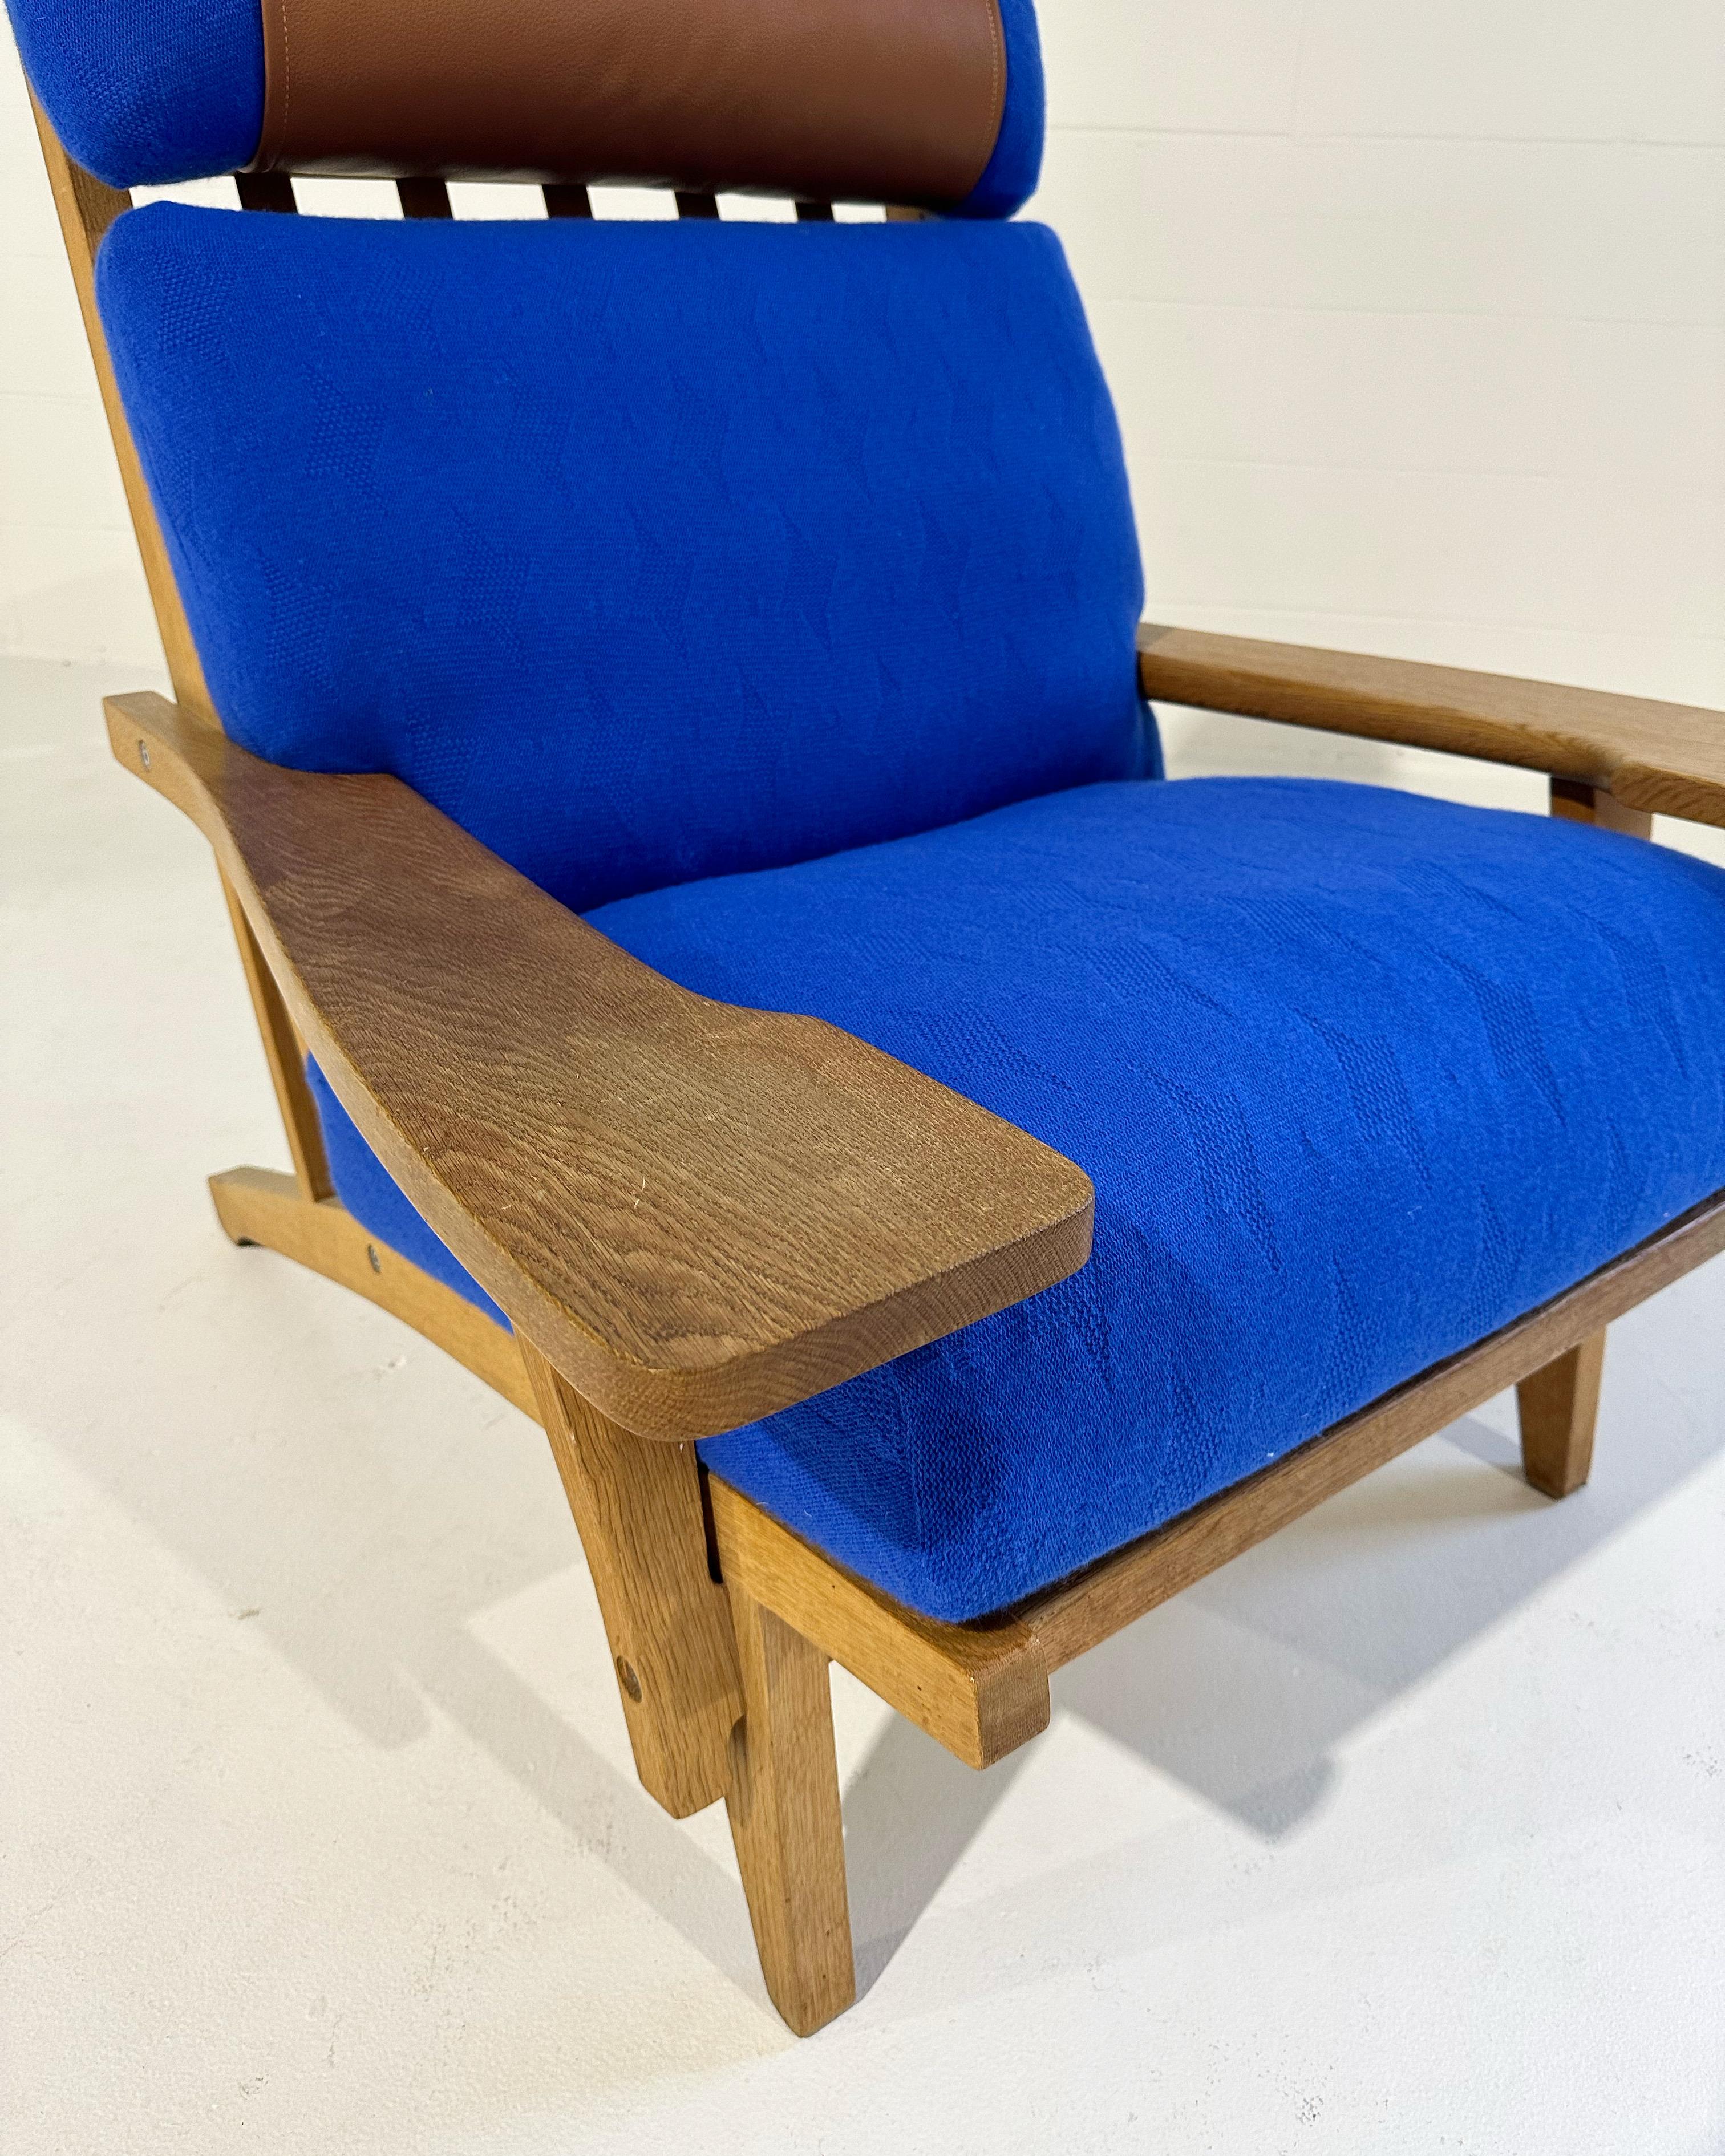 With gorgeous patinaed oak, custom cushions handcrafted from cashmere throws by  Saved NY, and a finishing touch of beautiful Loro Piana leather, this one-of-a-kind Hans Wegner lounge chair is incredible. We love the caramel leather and Klein blue